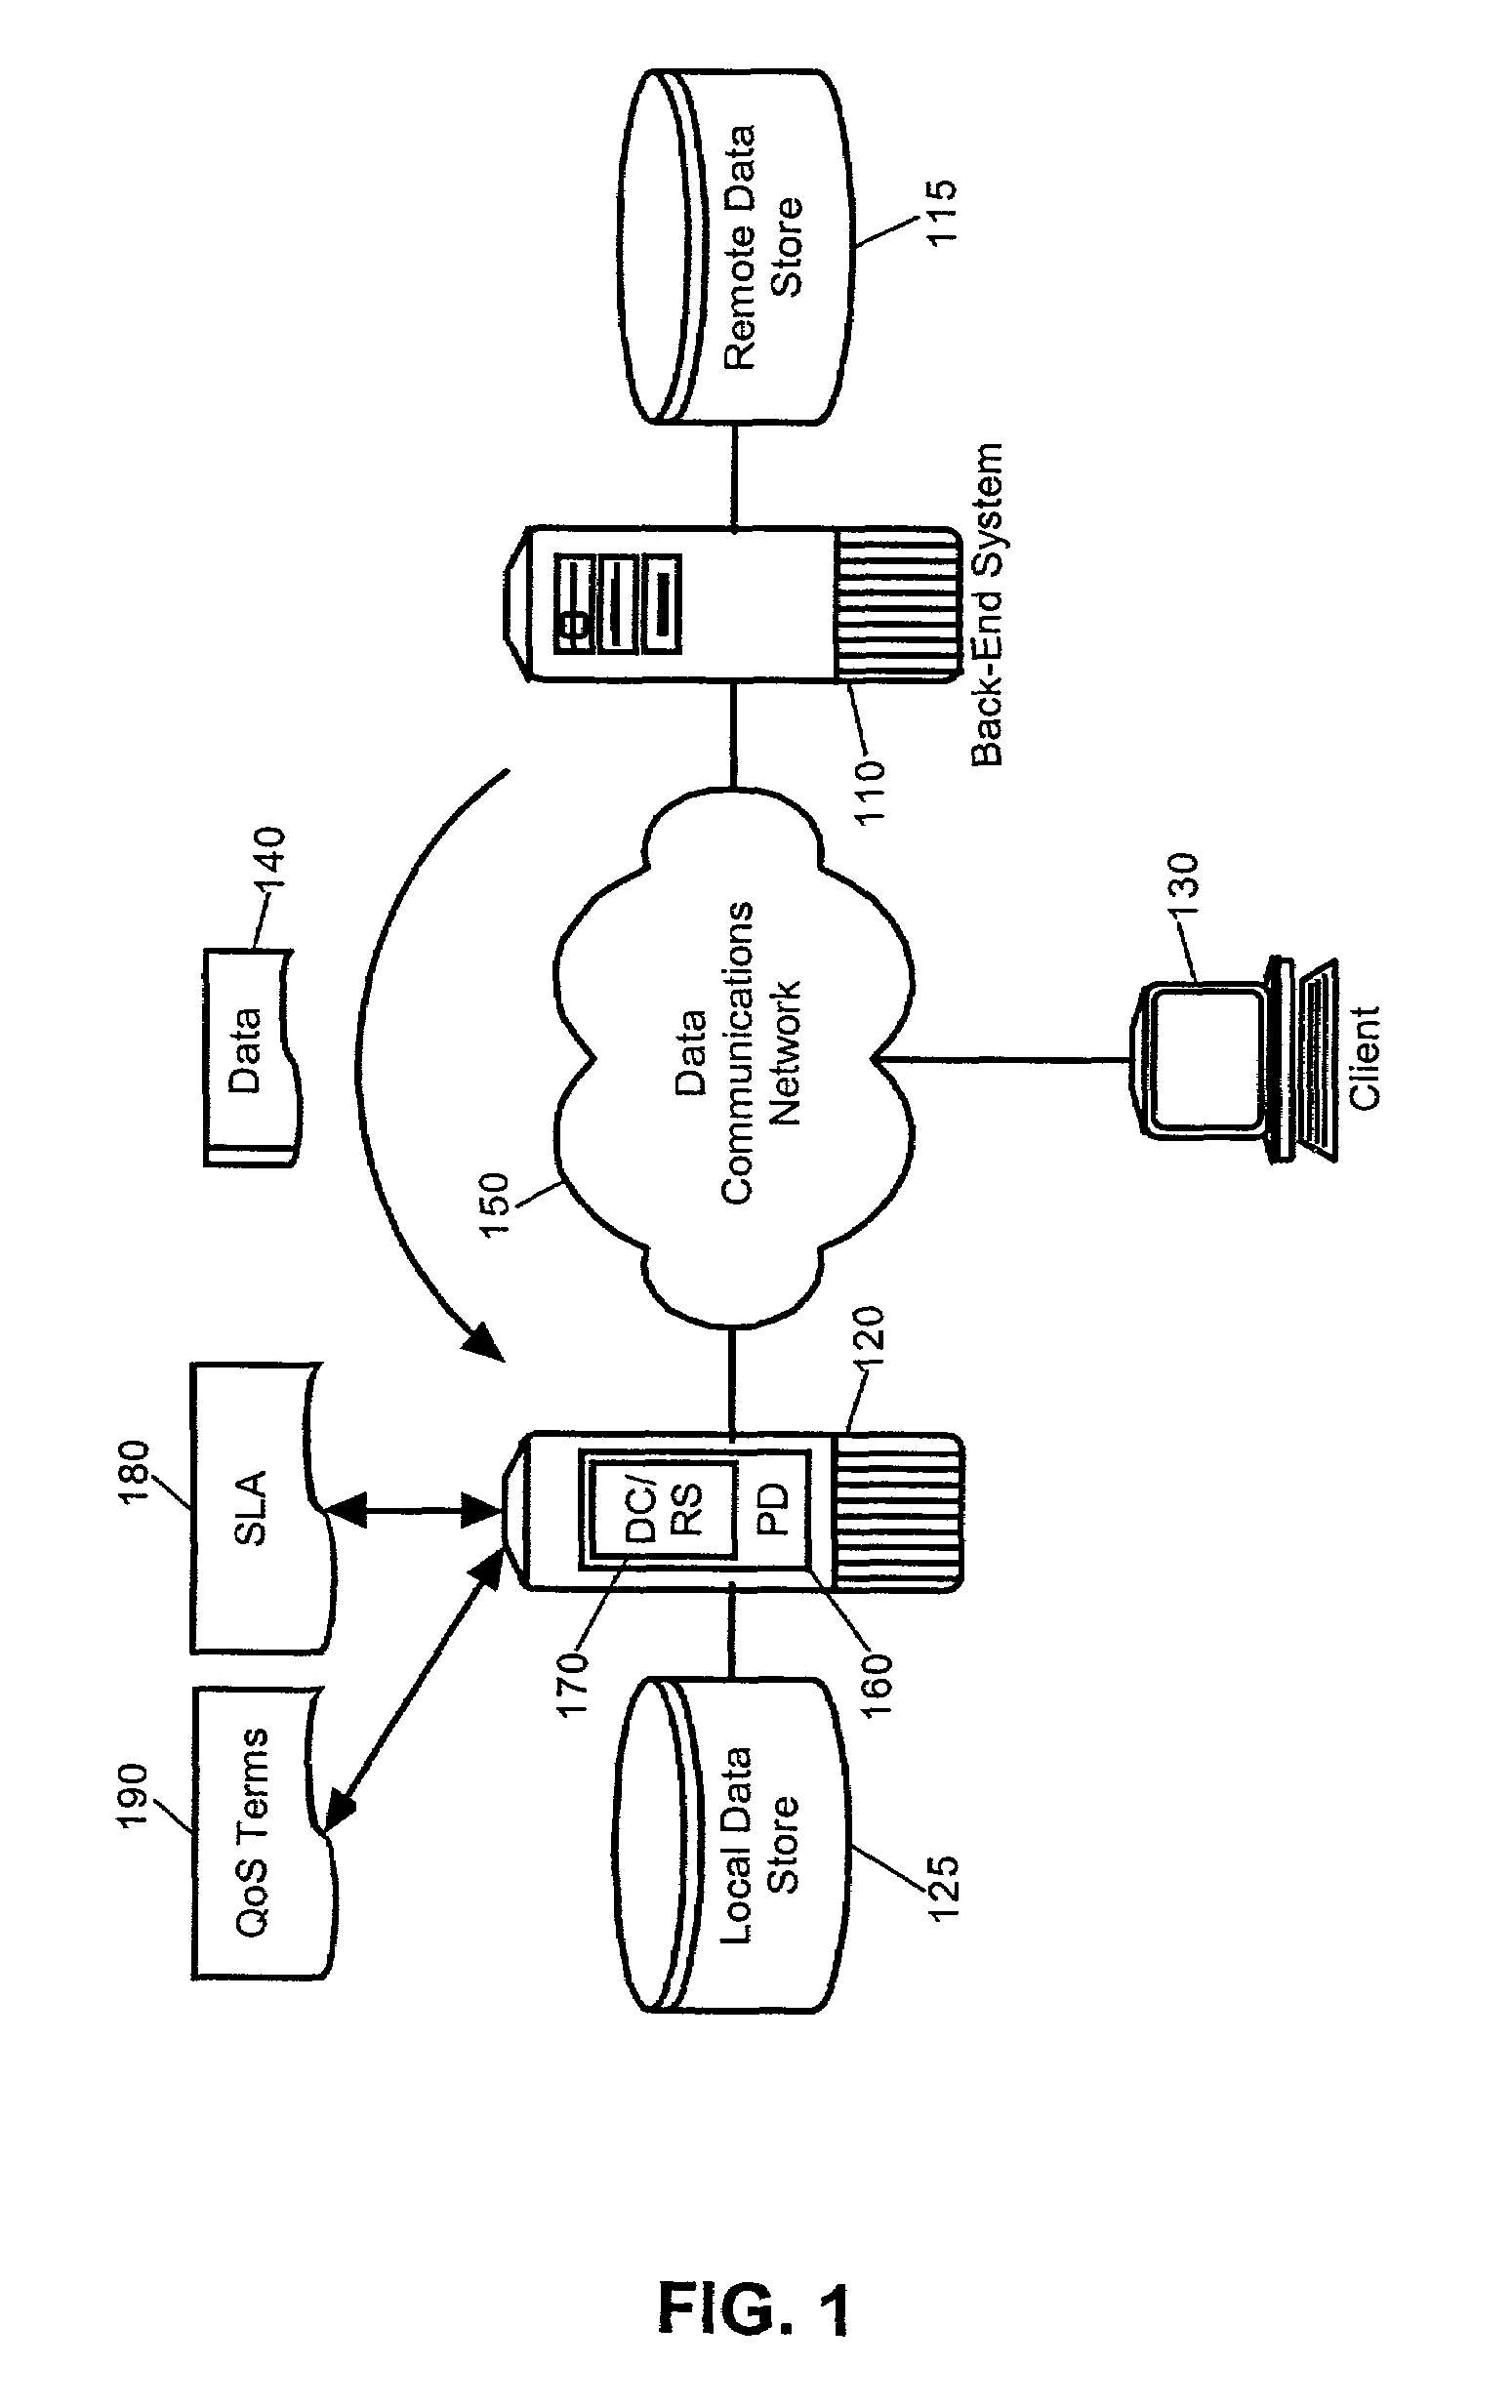 Enforcement of service terms through adaptive edge processing of application data